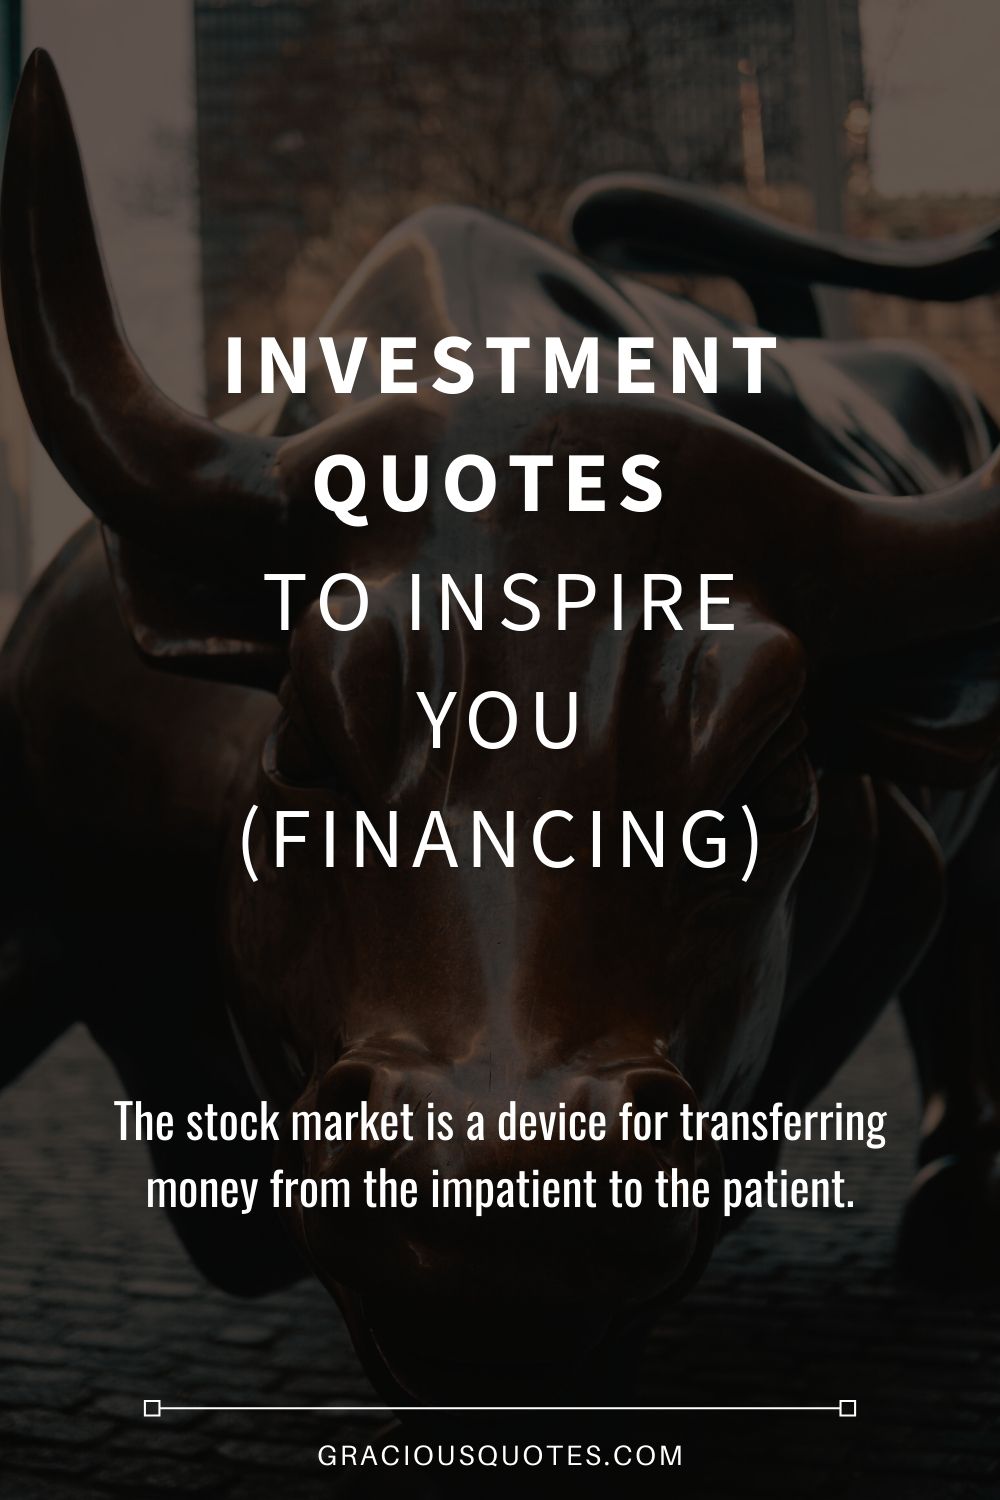 Investment Quotes to Inspire You (FINANCING) - Gracious Quotes